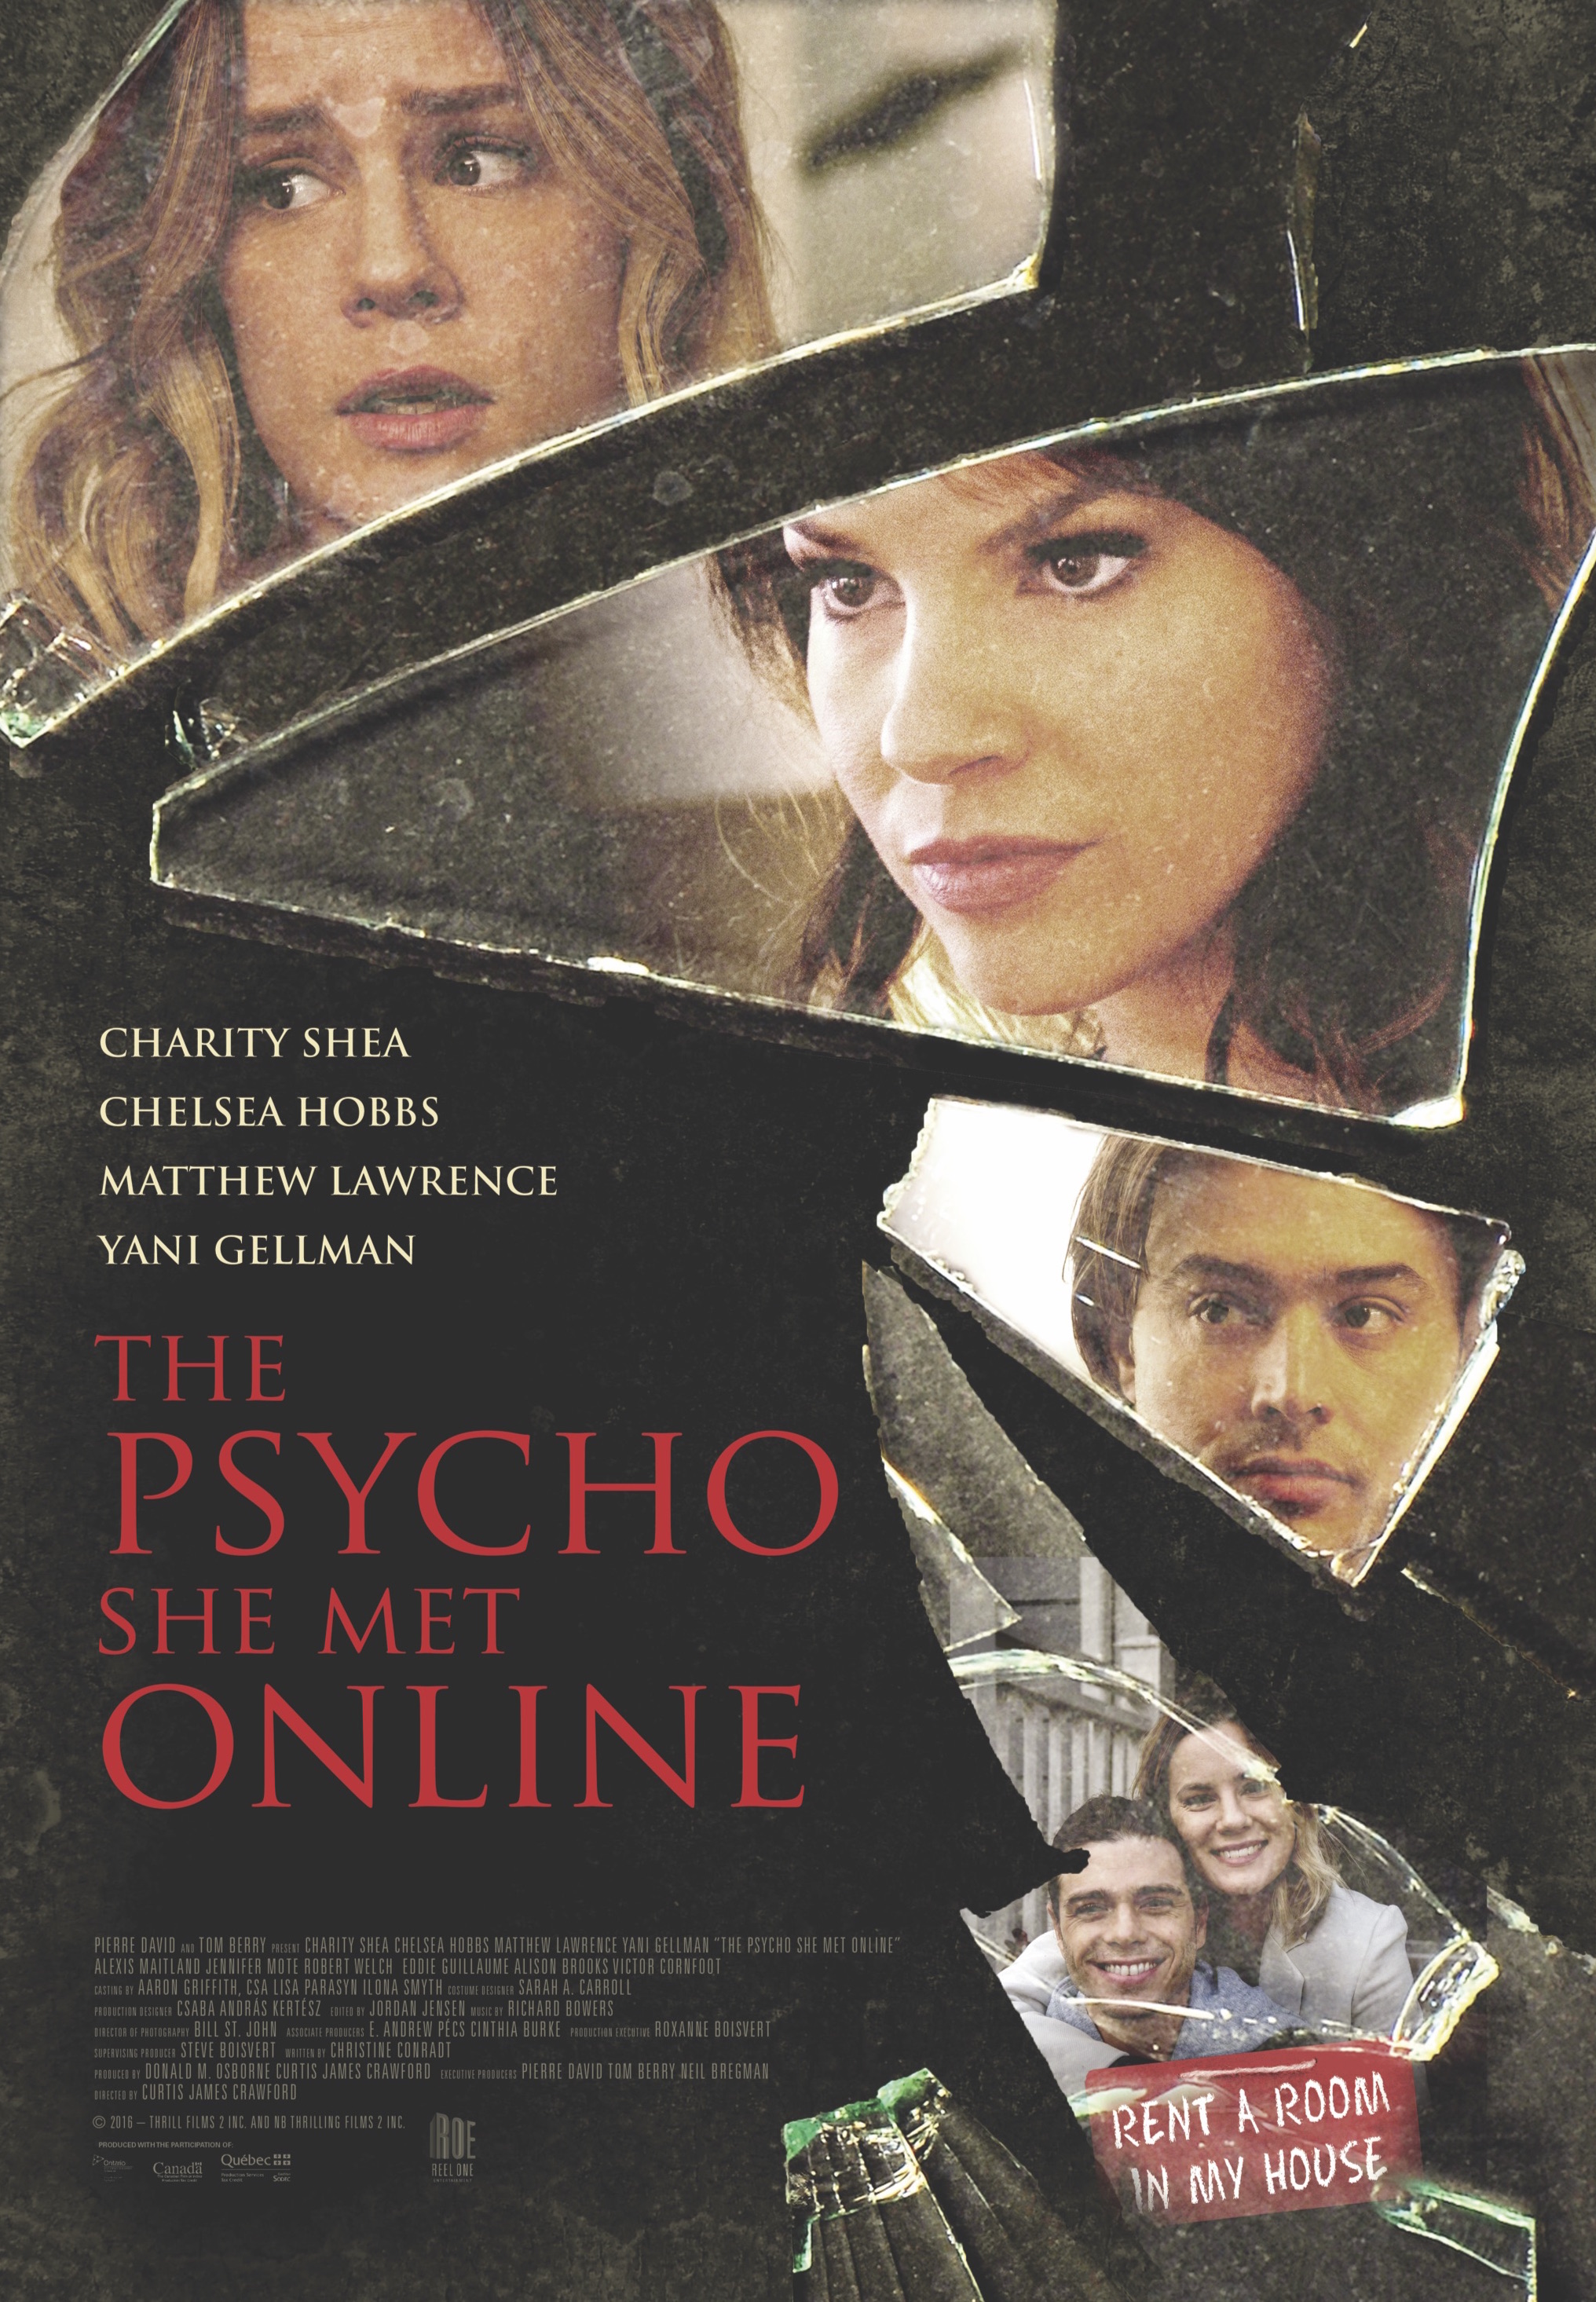 The Psycho She Met Online (2017) starring Charity Shea on DVD on DVD